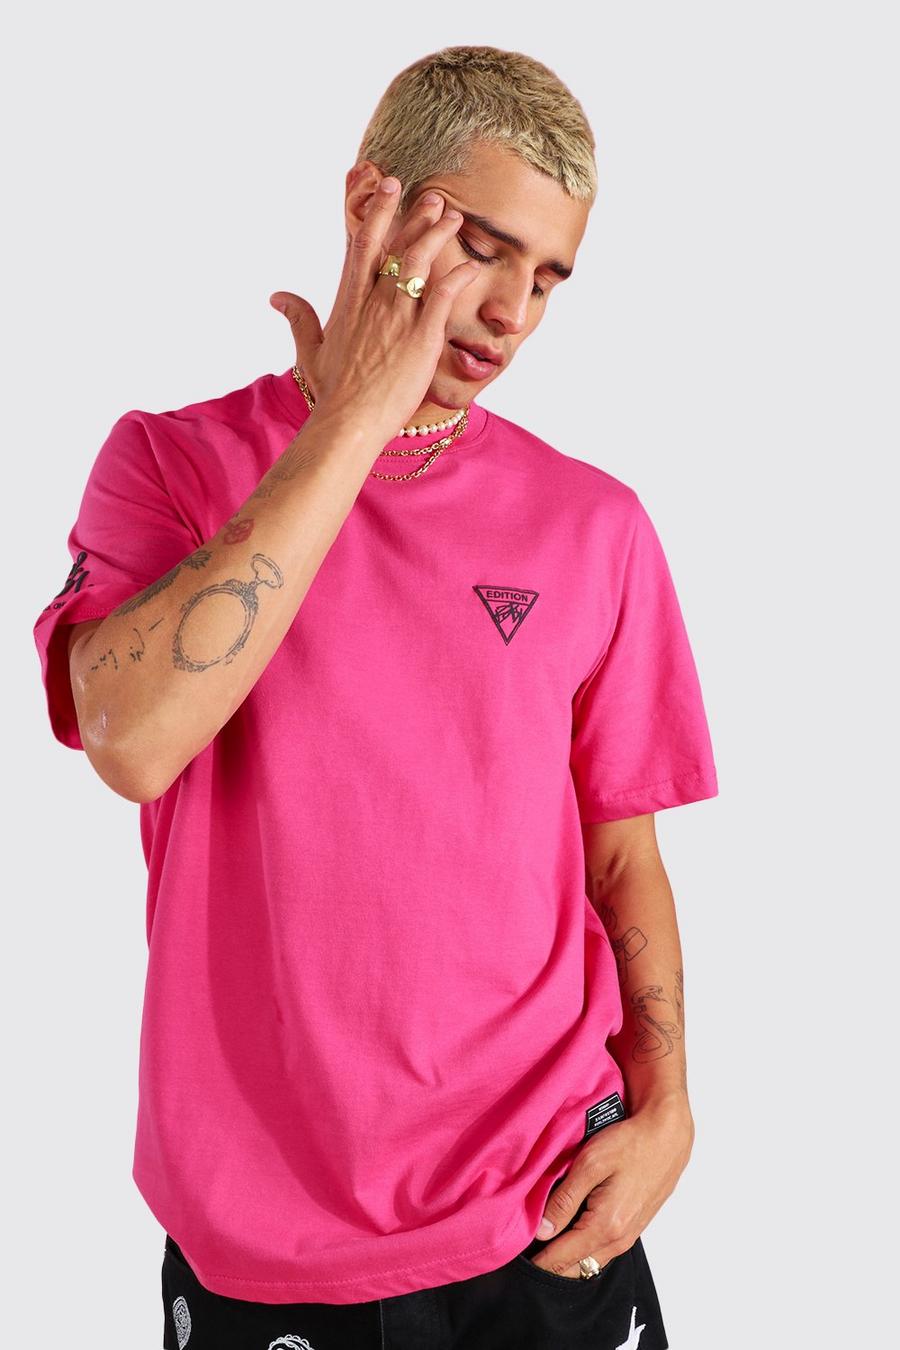 T-shirt Worldwide, Pink rosa image number 1